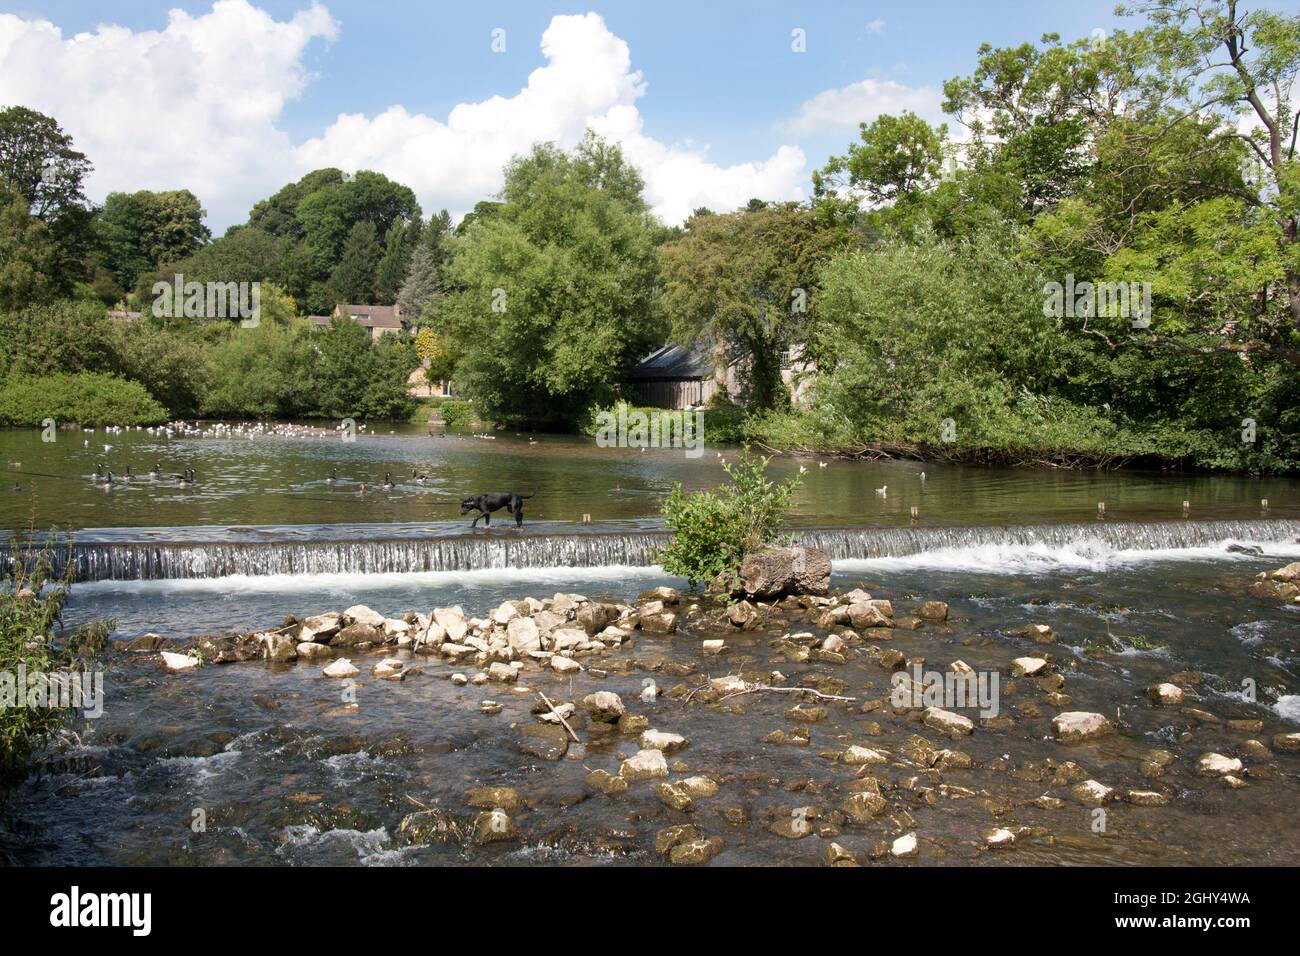 the River Wye & weir, Bakewell, Peak District, Derbyshire, England Stock Photo